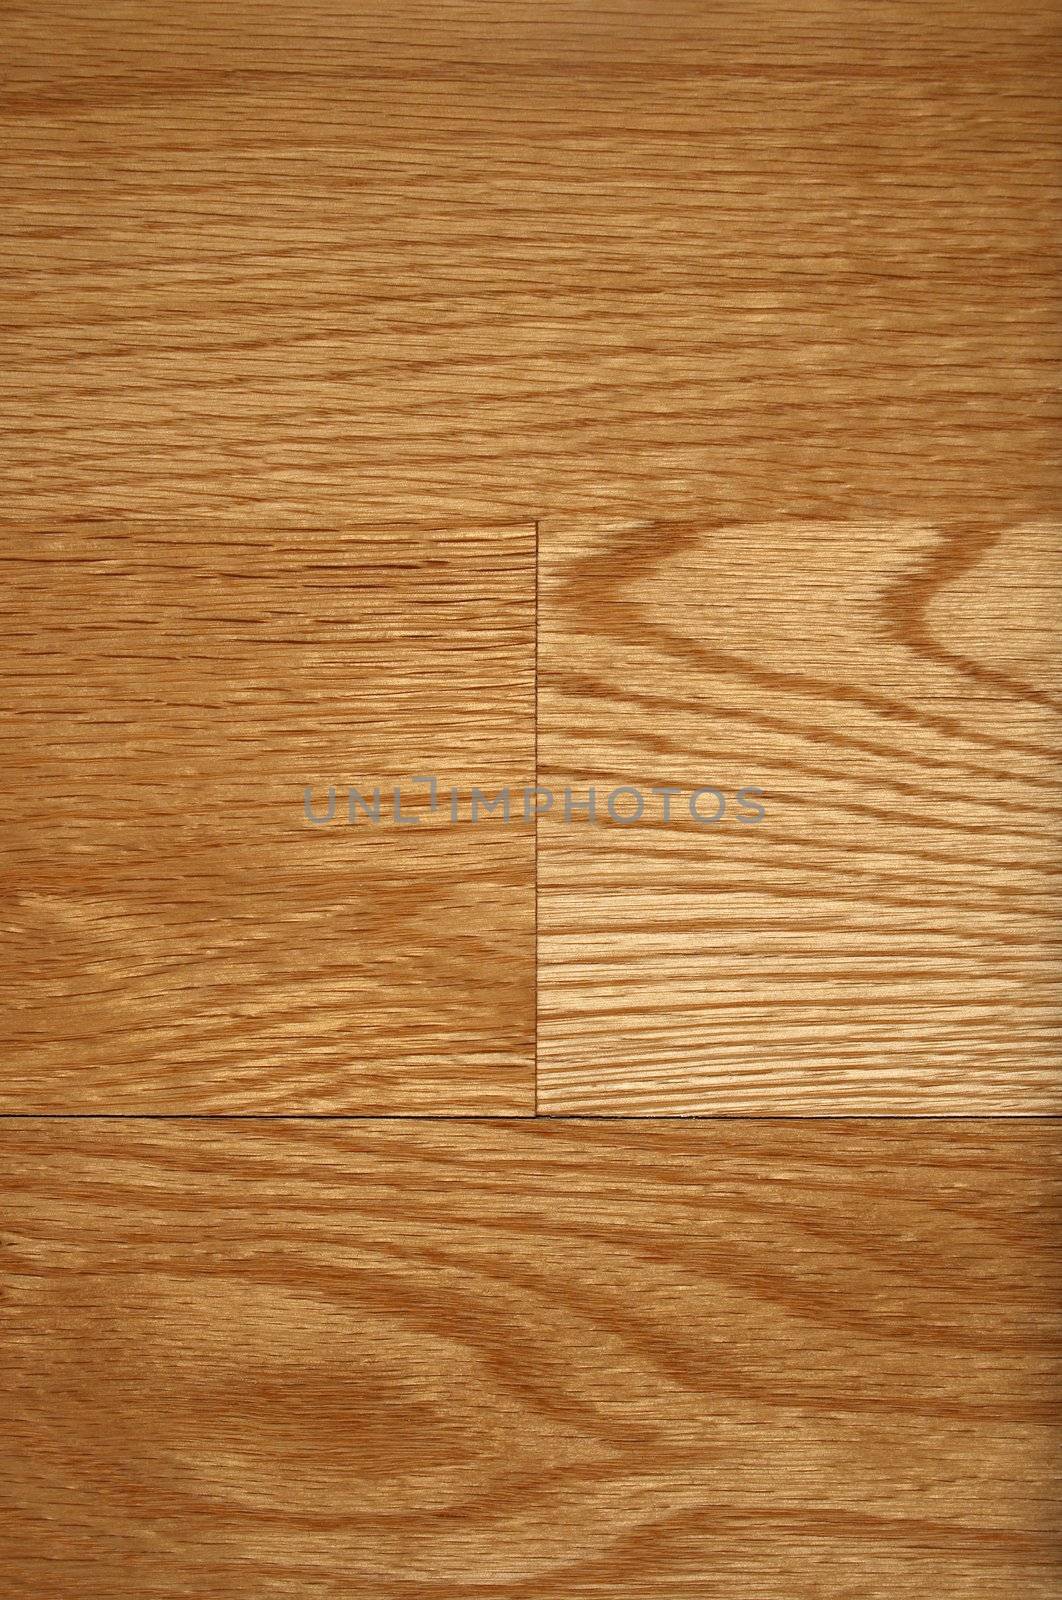 Texture of the polished hardwood floor of natural color